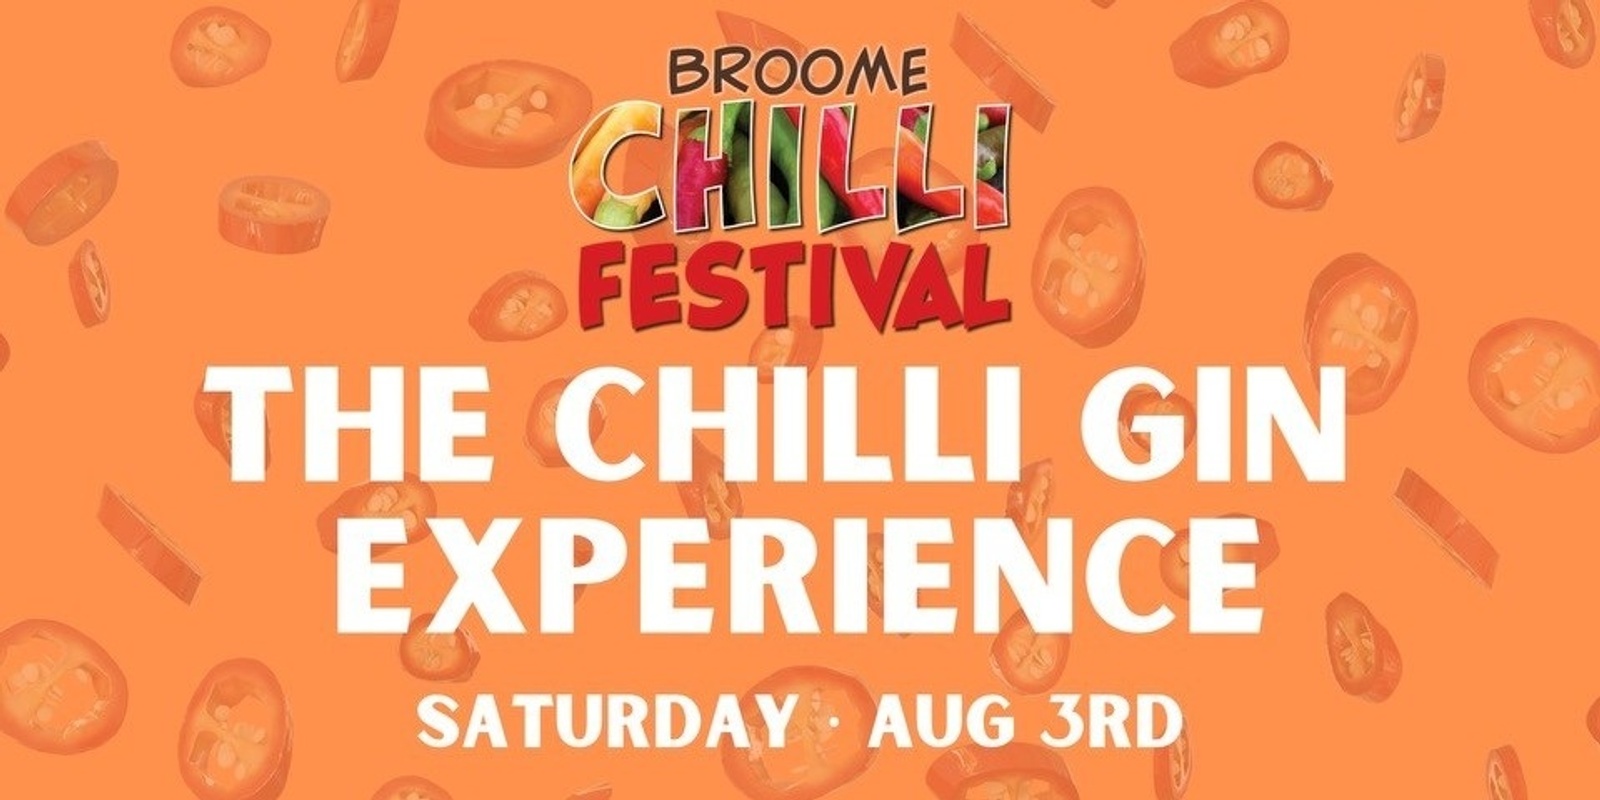 Banner image for The Chilli Gin Experience